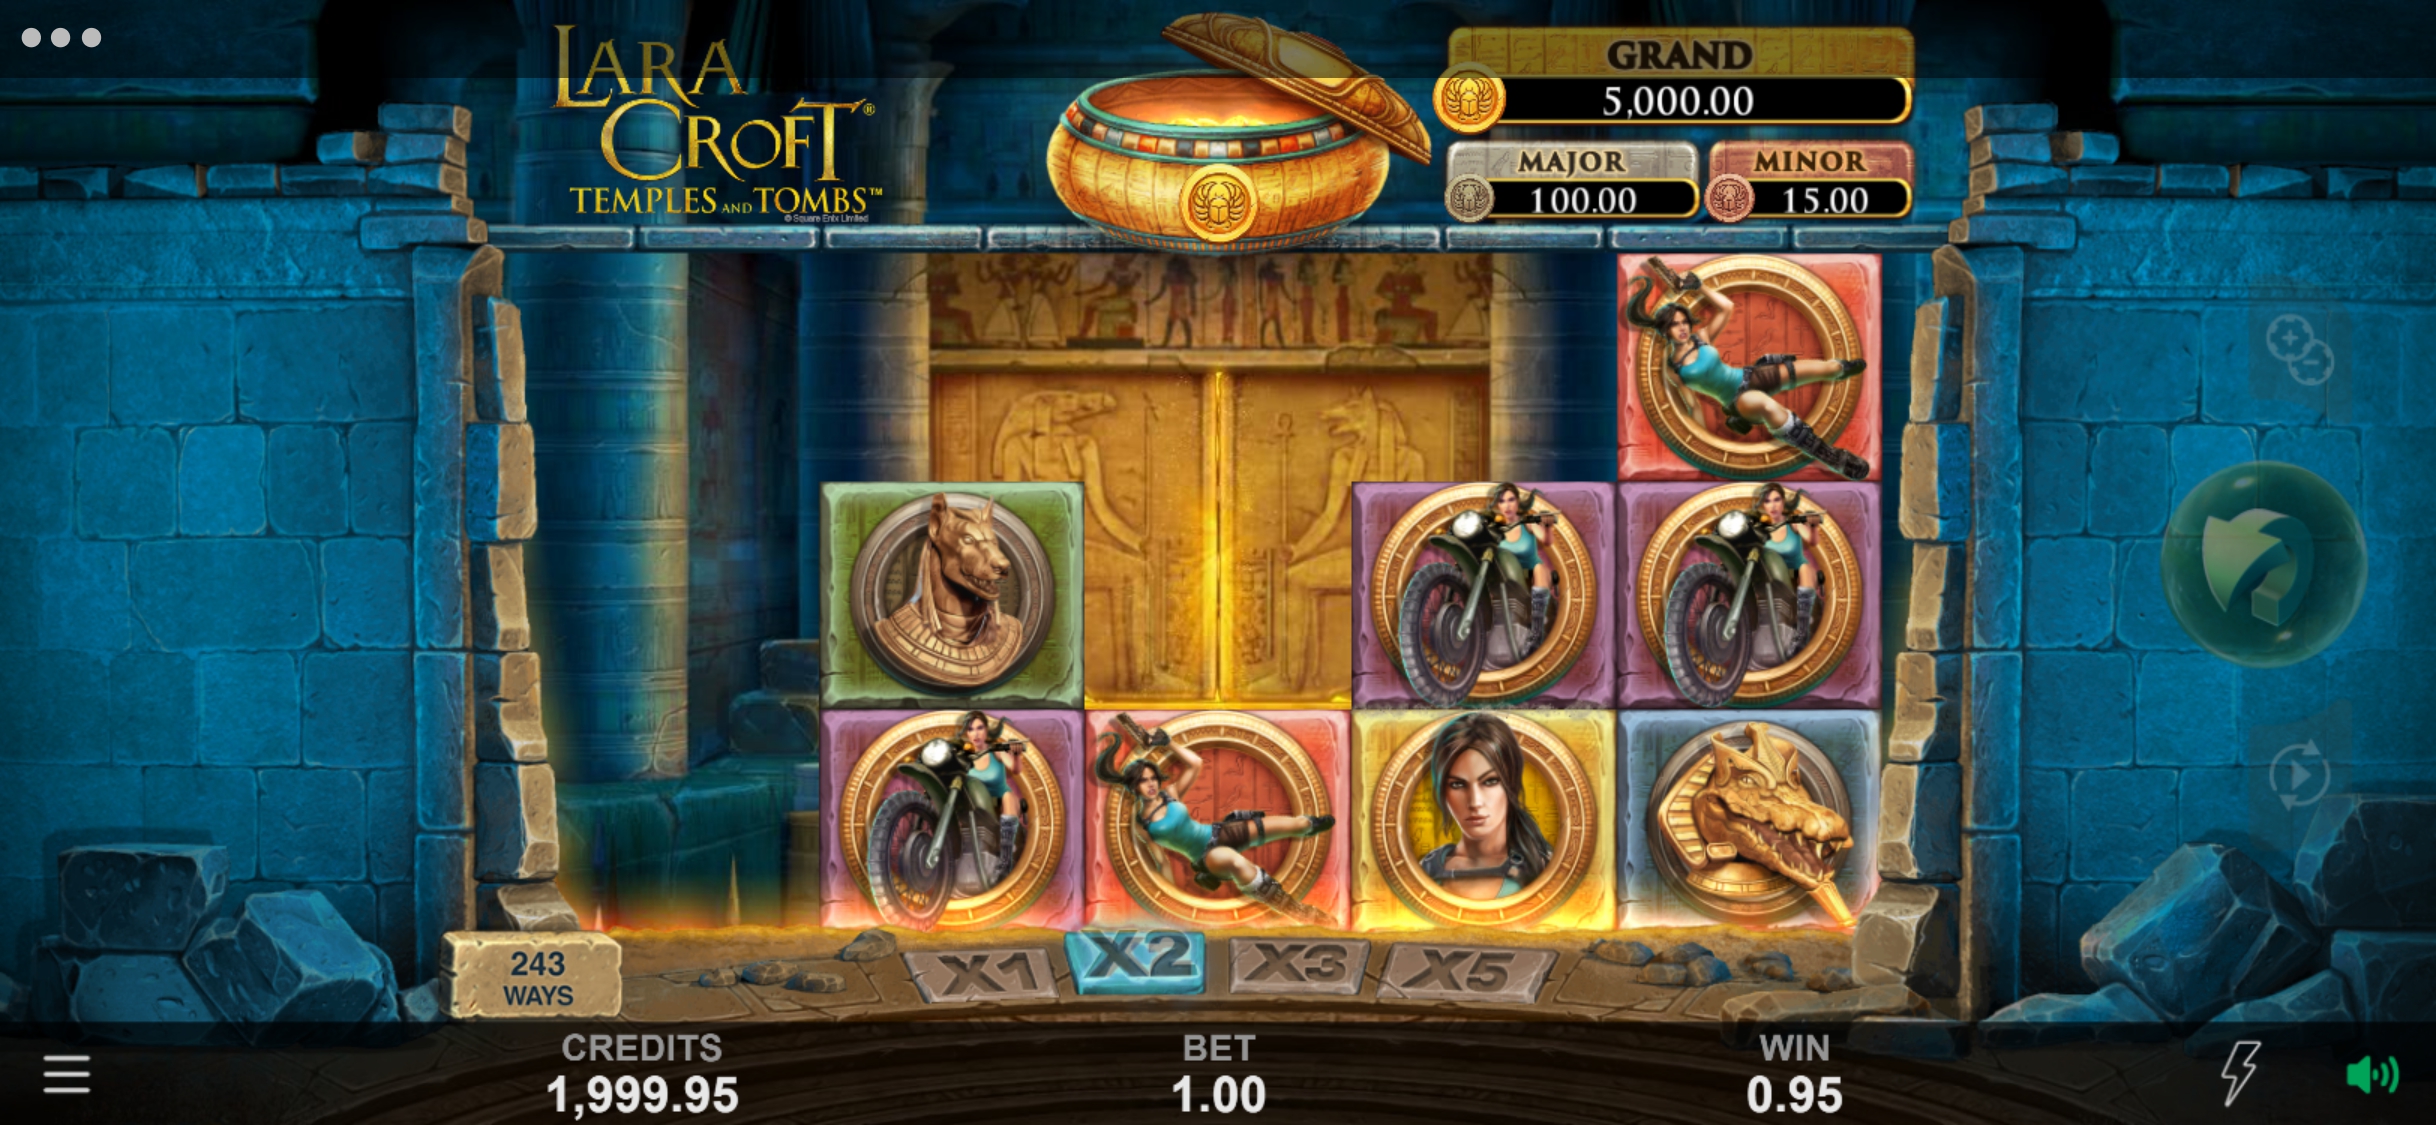 BetWinner Casino Mobile Slot Games Review